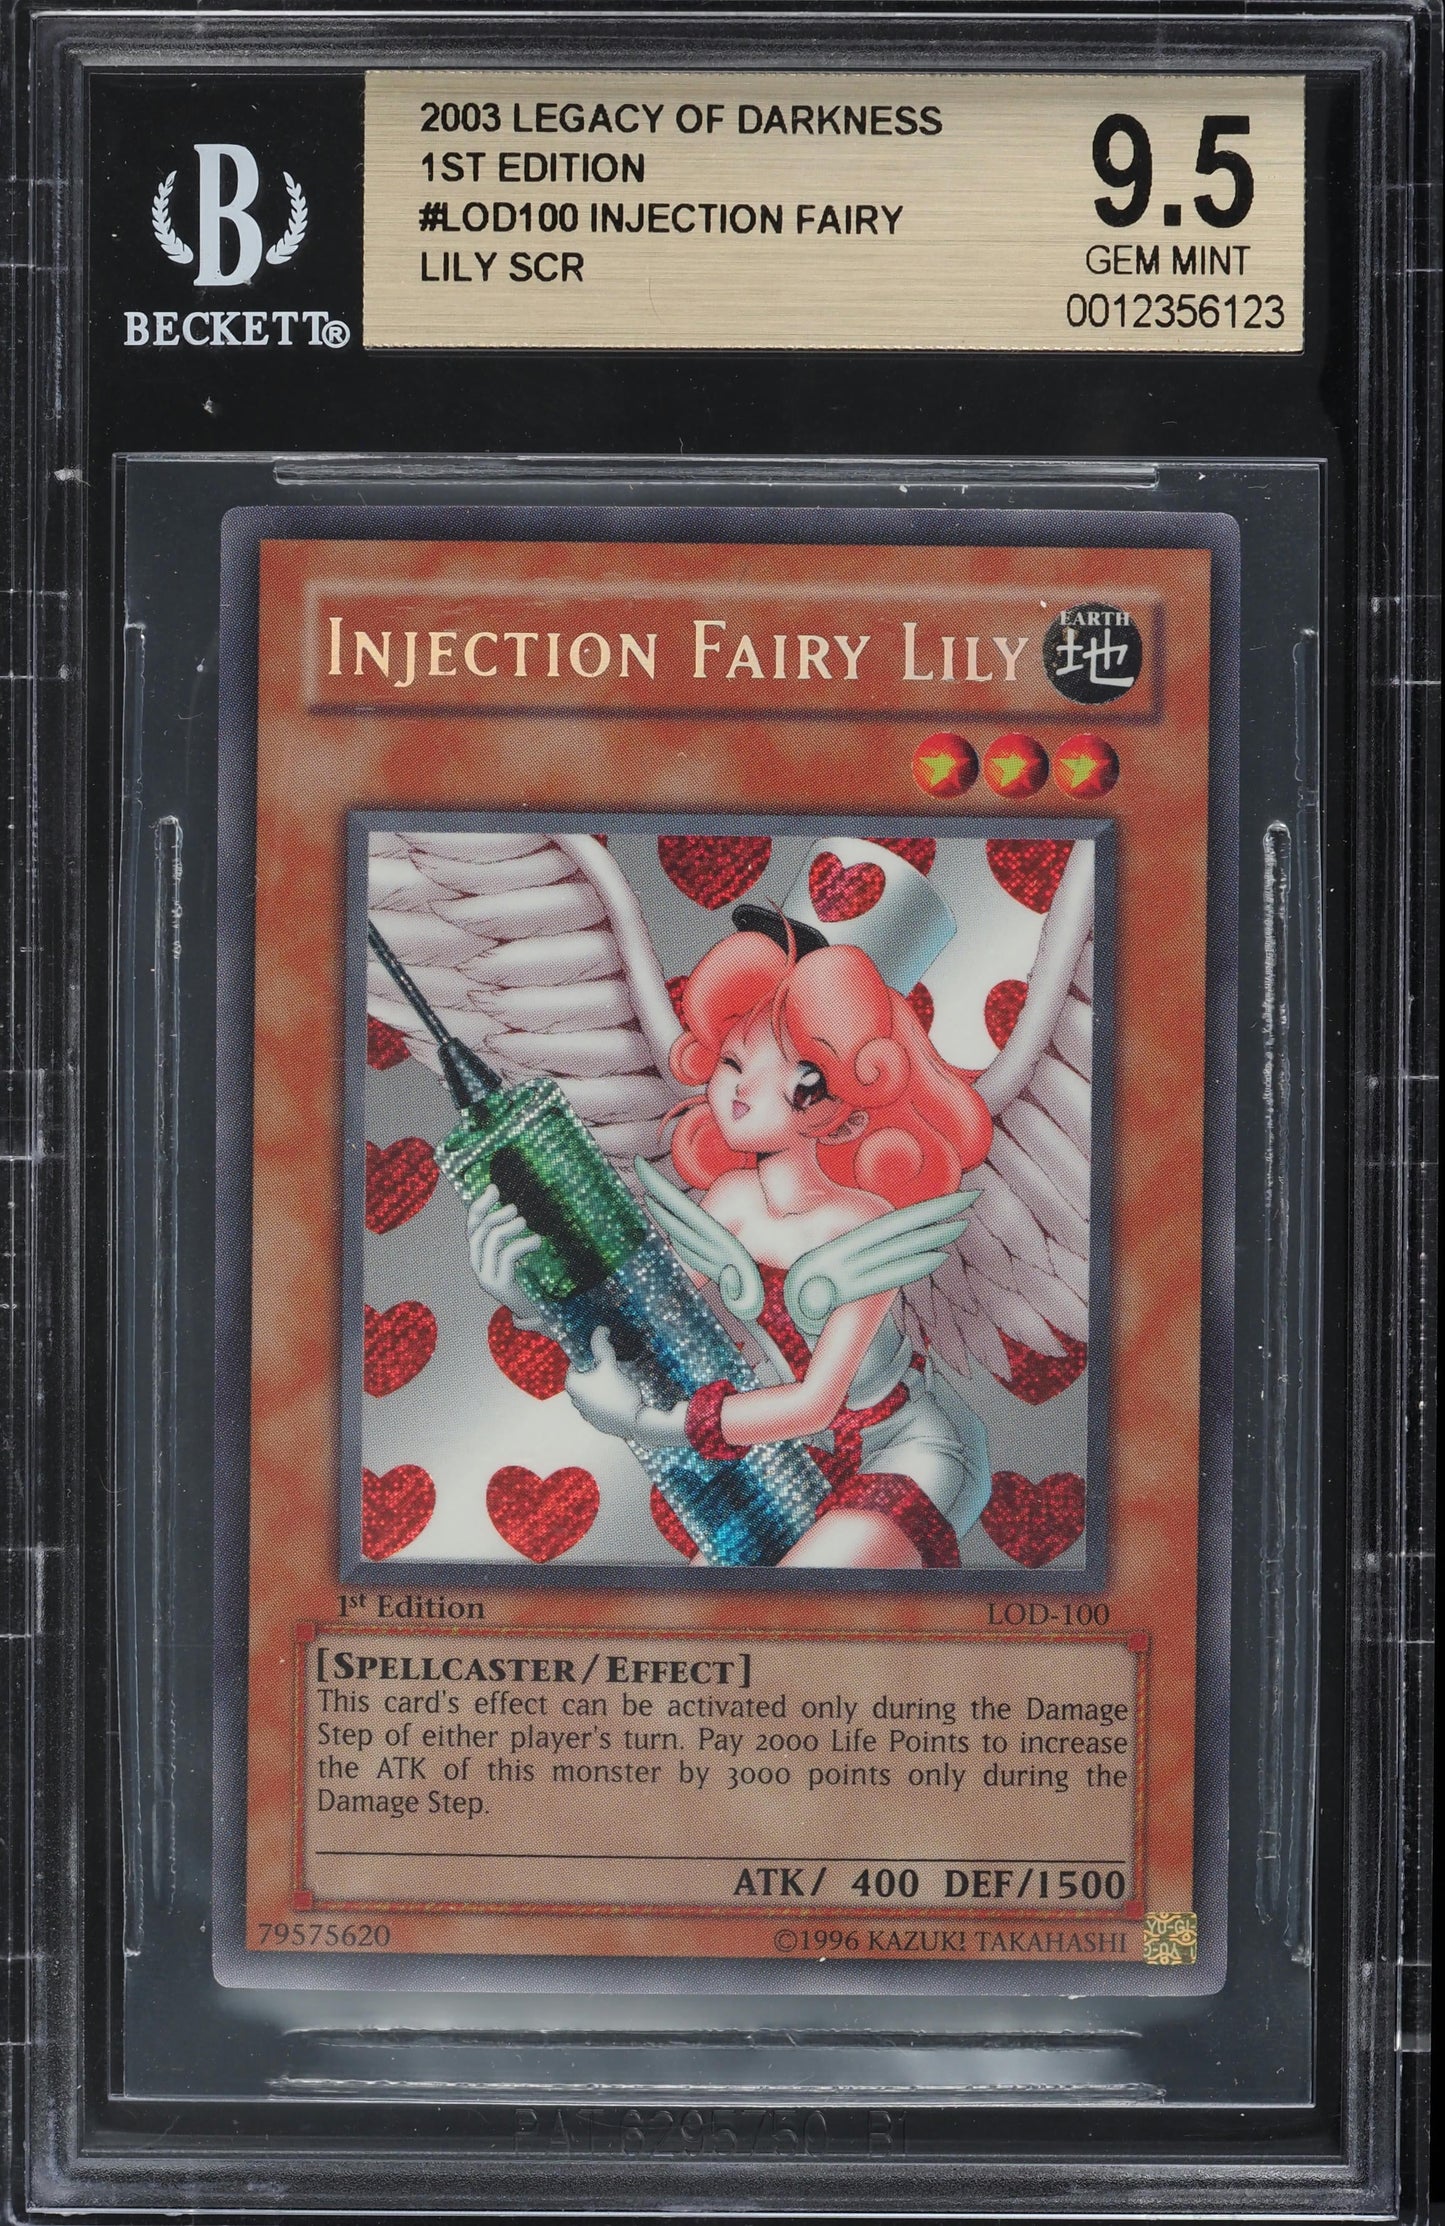 2003 YU-GI-OH! LEGACY OF DARKNESS 1ST ED INJECTION FAIRY LILY #LOD-100 BGS 9.5